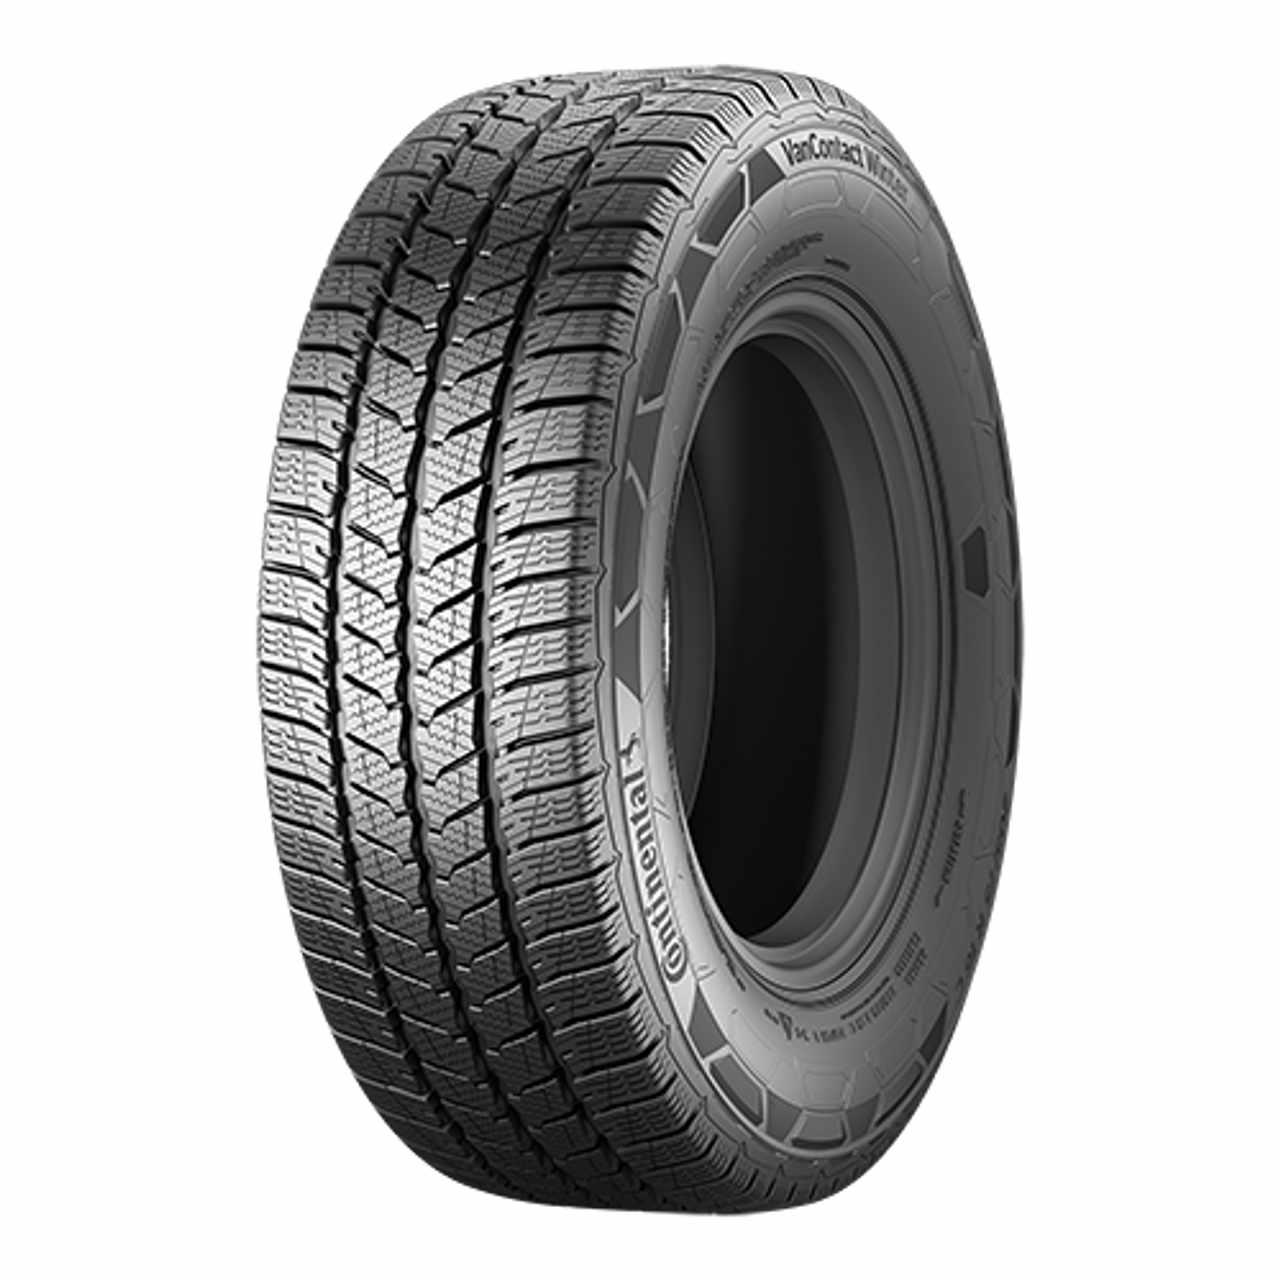 CONTINENTAL VANCONTACT WINTER 195/65R15C 98T BSW